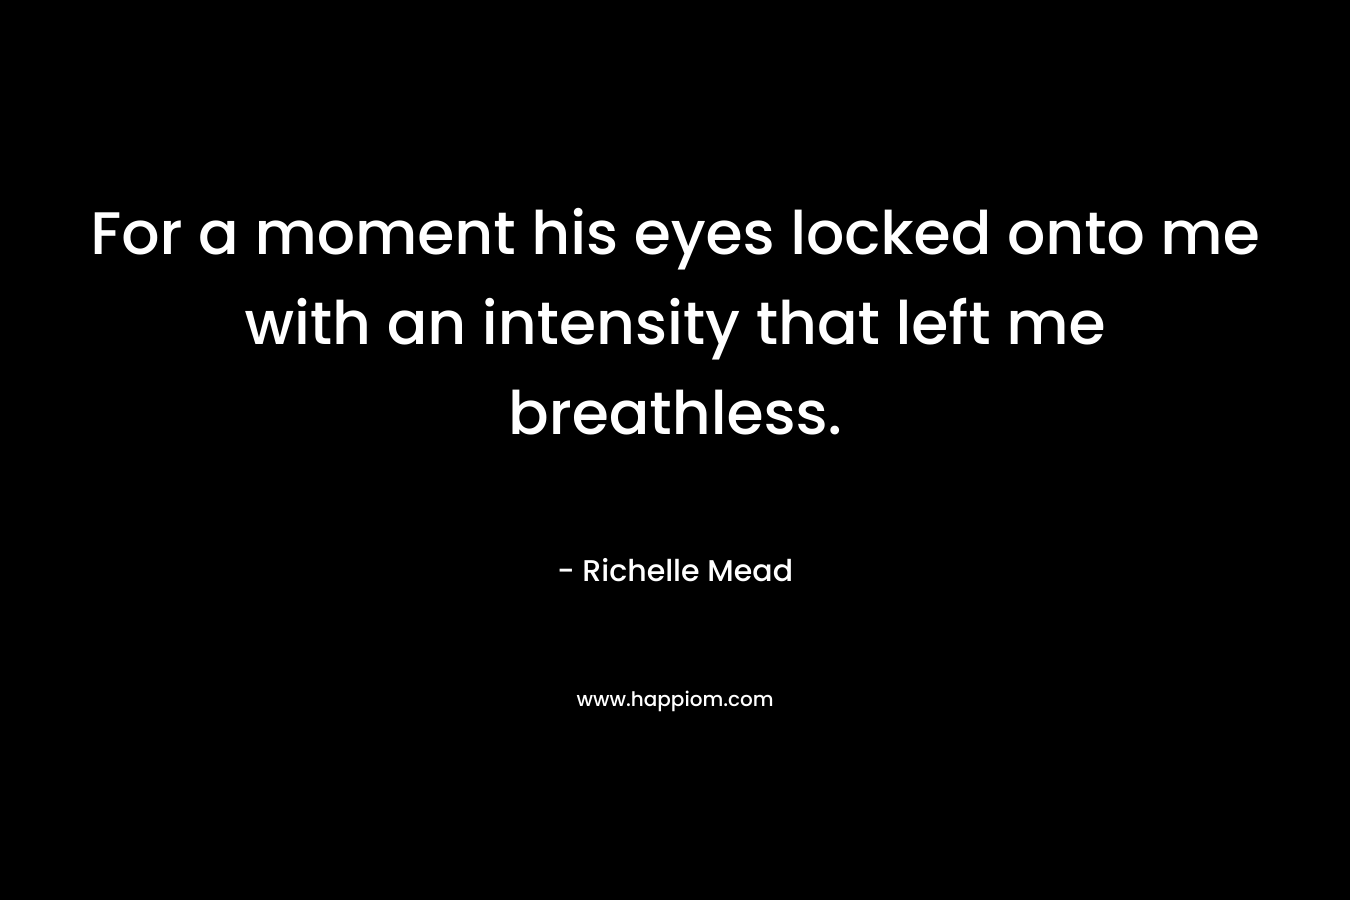 For a moment his eyes locked onto me with an intensity that left me breathless. – Richelle Mead